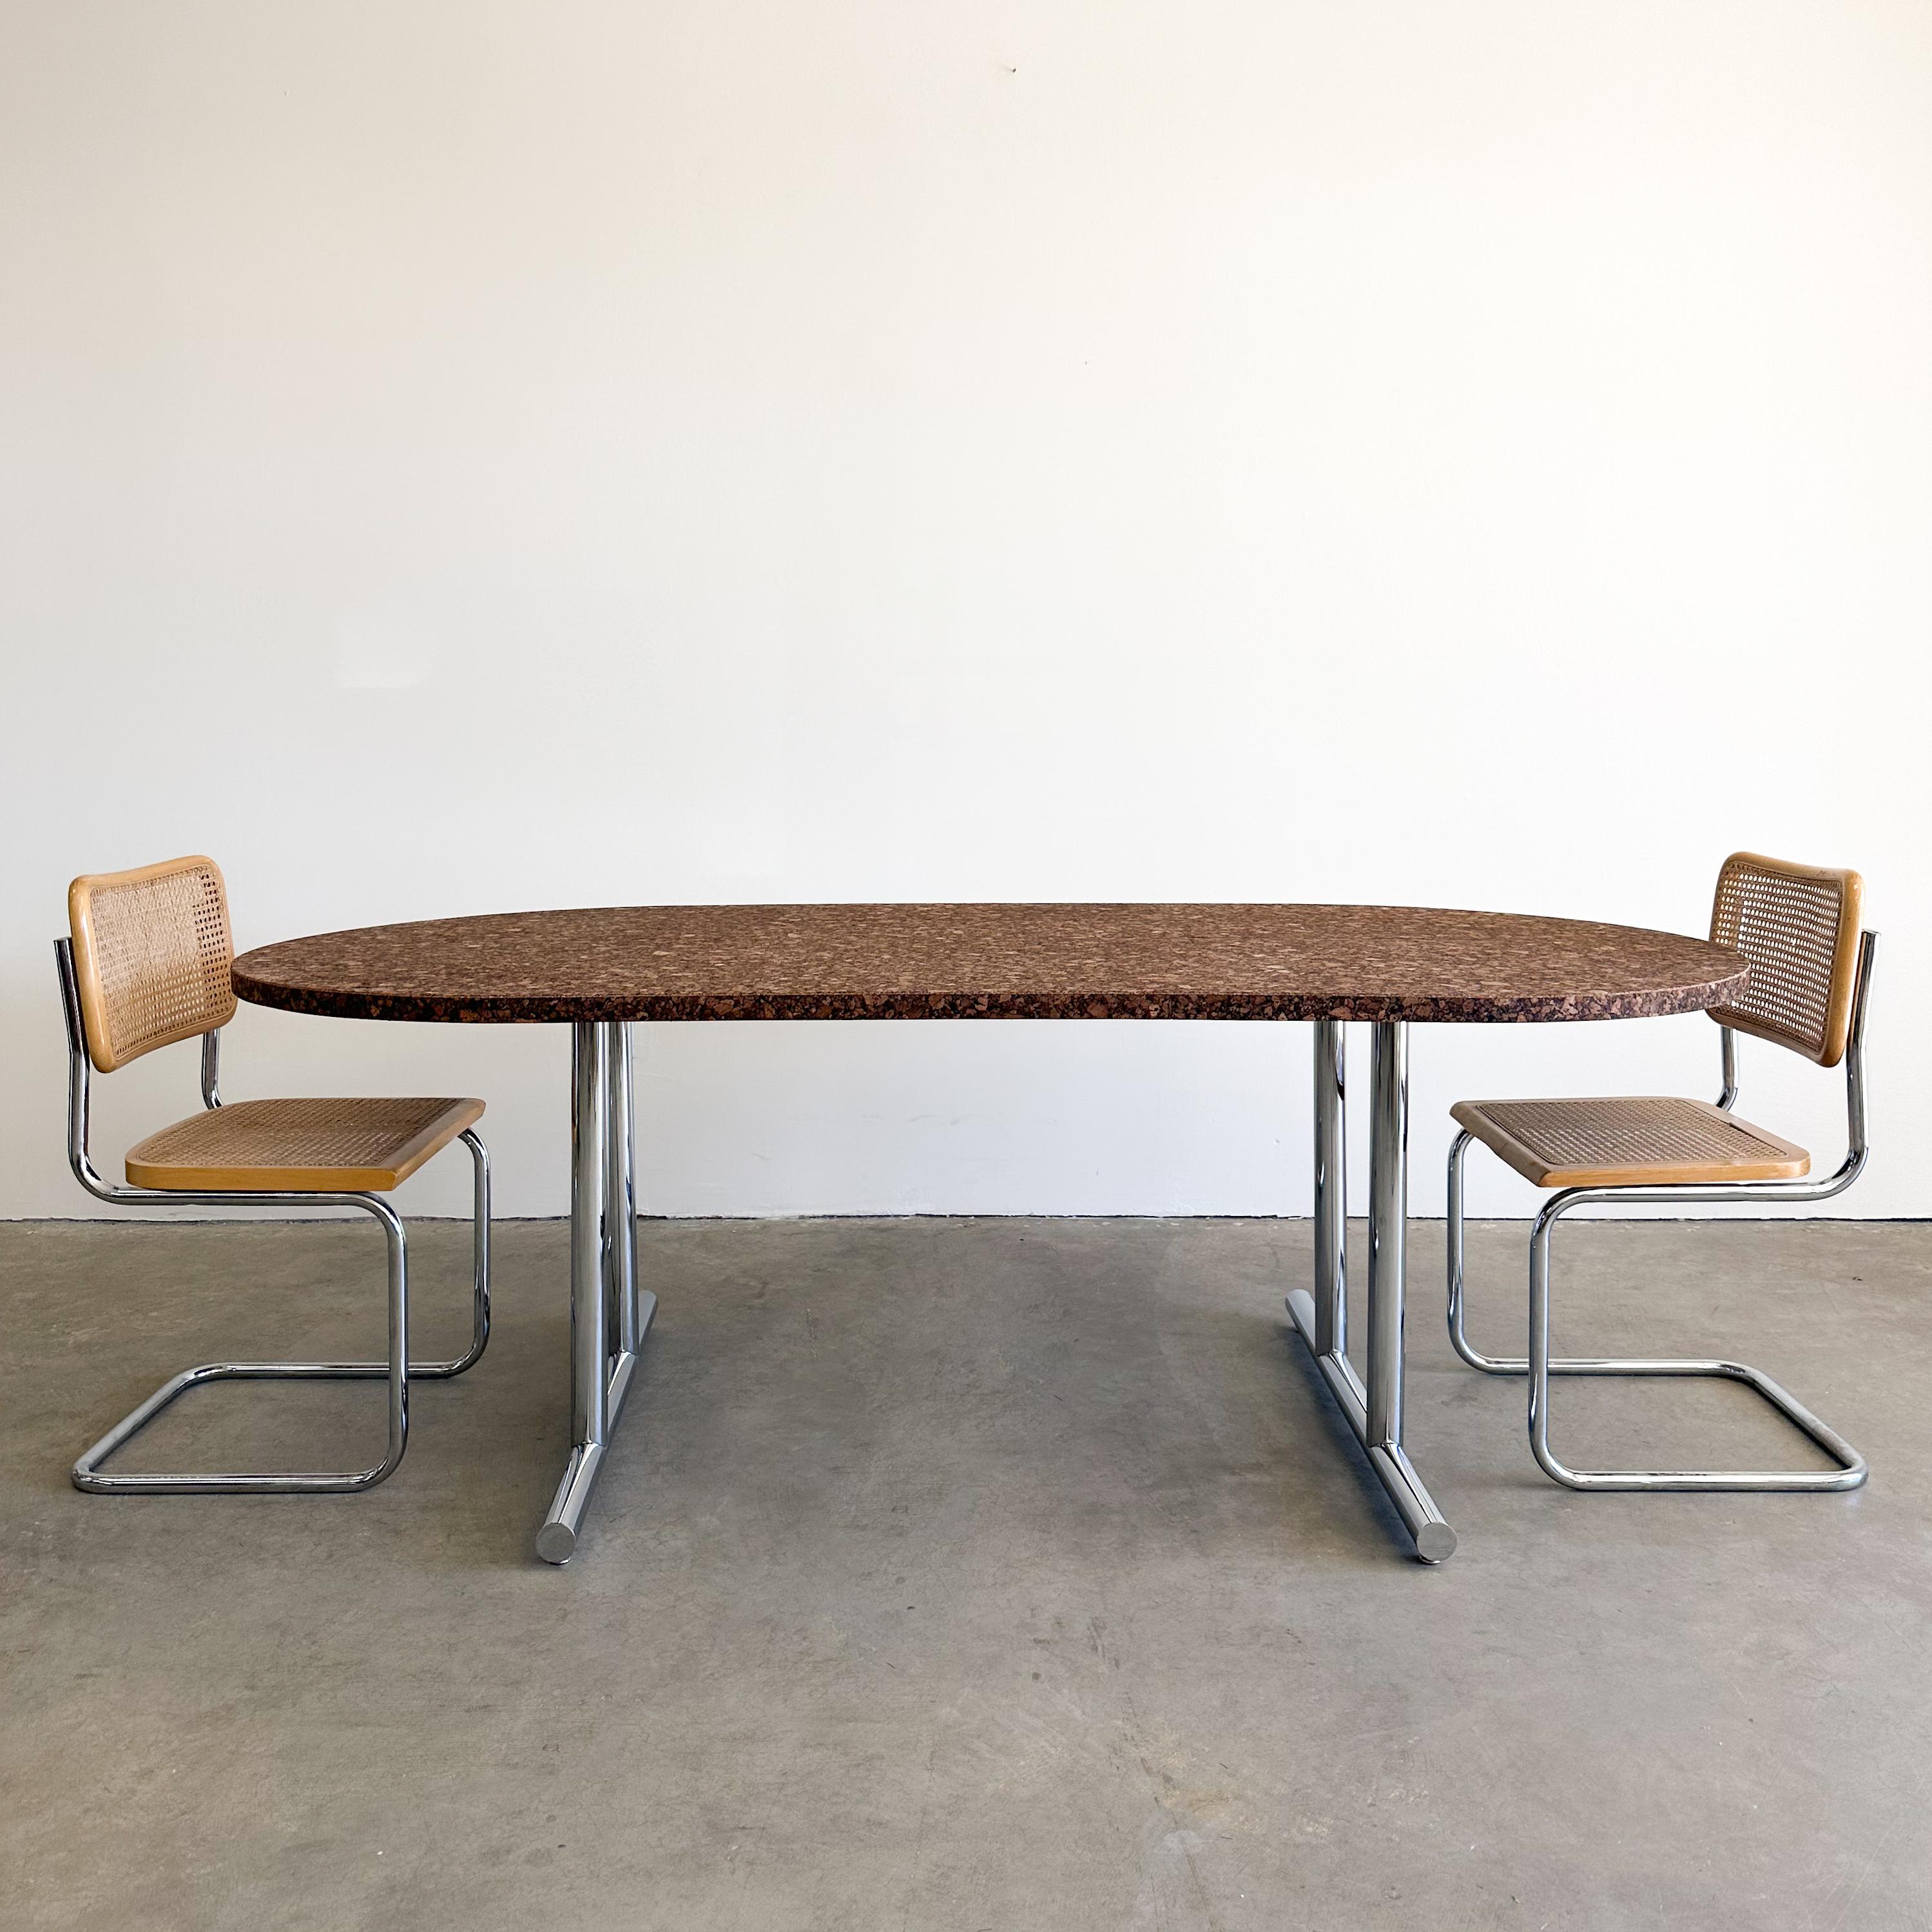 Vintage Oval Cork Dining Table.

This table can serve multiple purposes. It can be used as a conference table for professional meetings, offering a distinct and creative aesthetic, or it can function as a dining table for your home, allowing you to